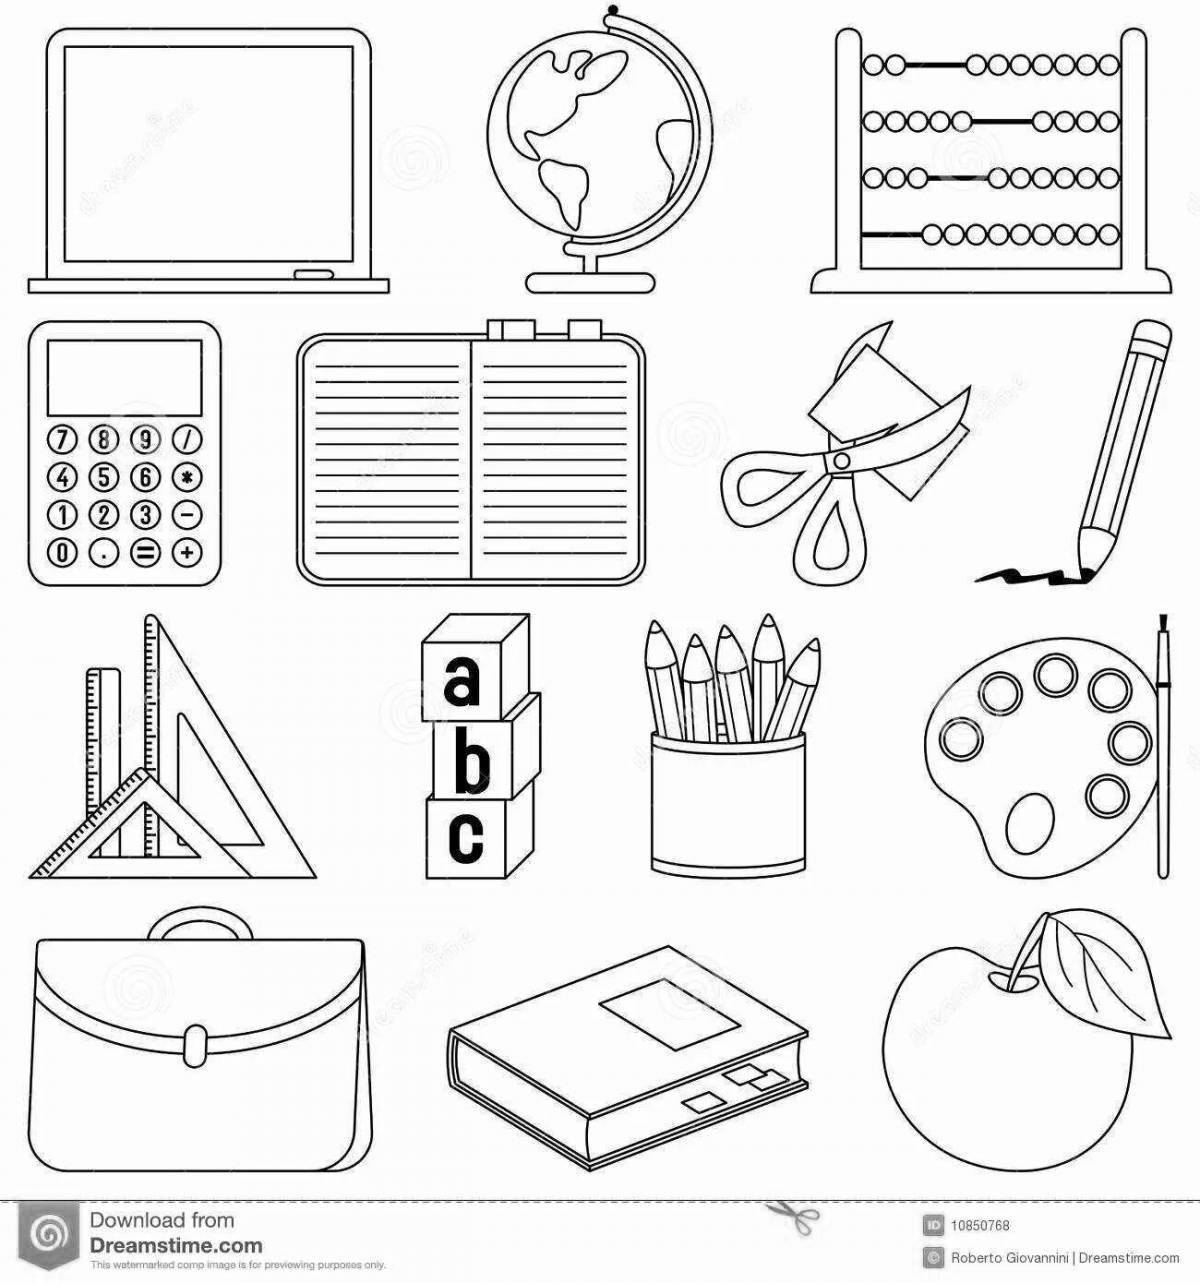 Playful school supplies coloring page